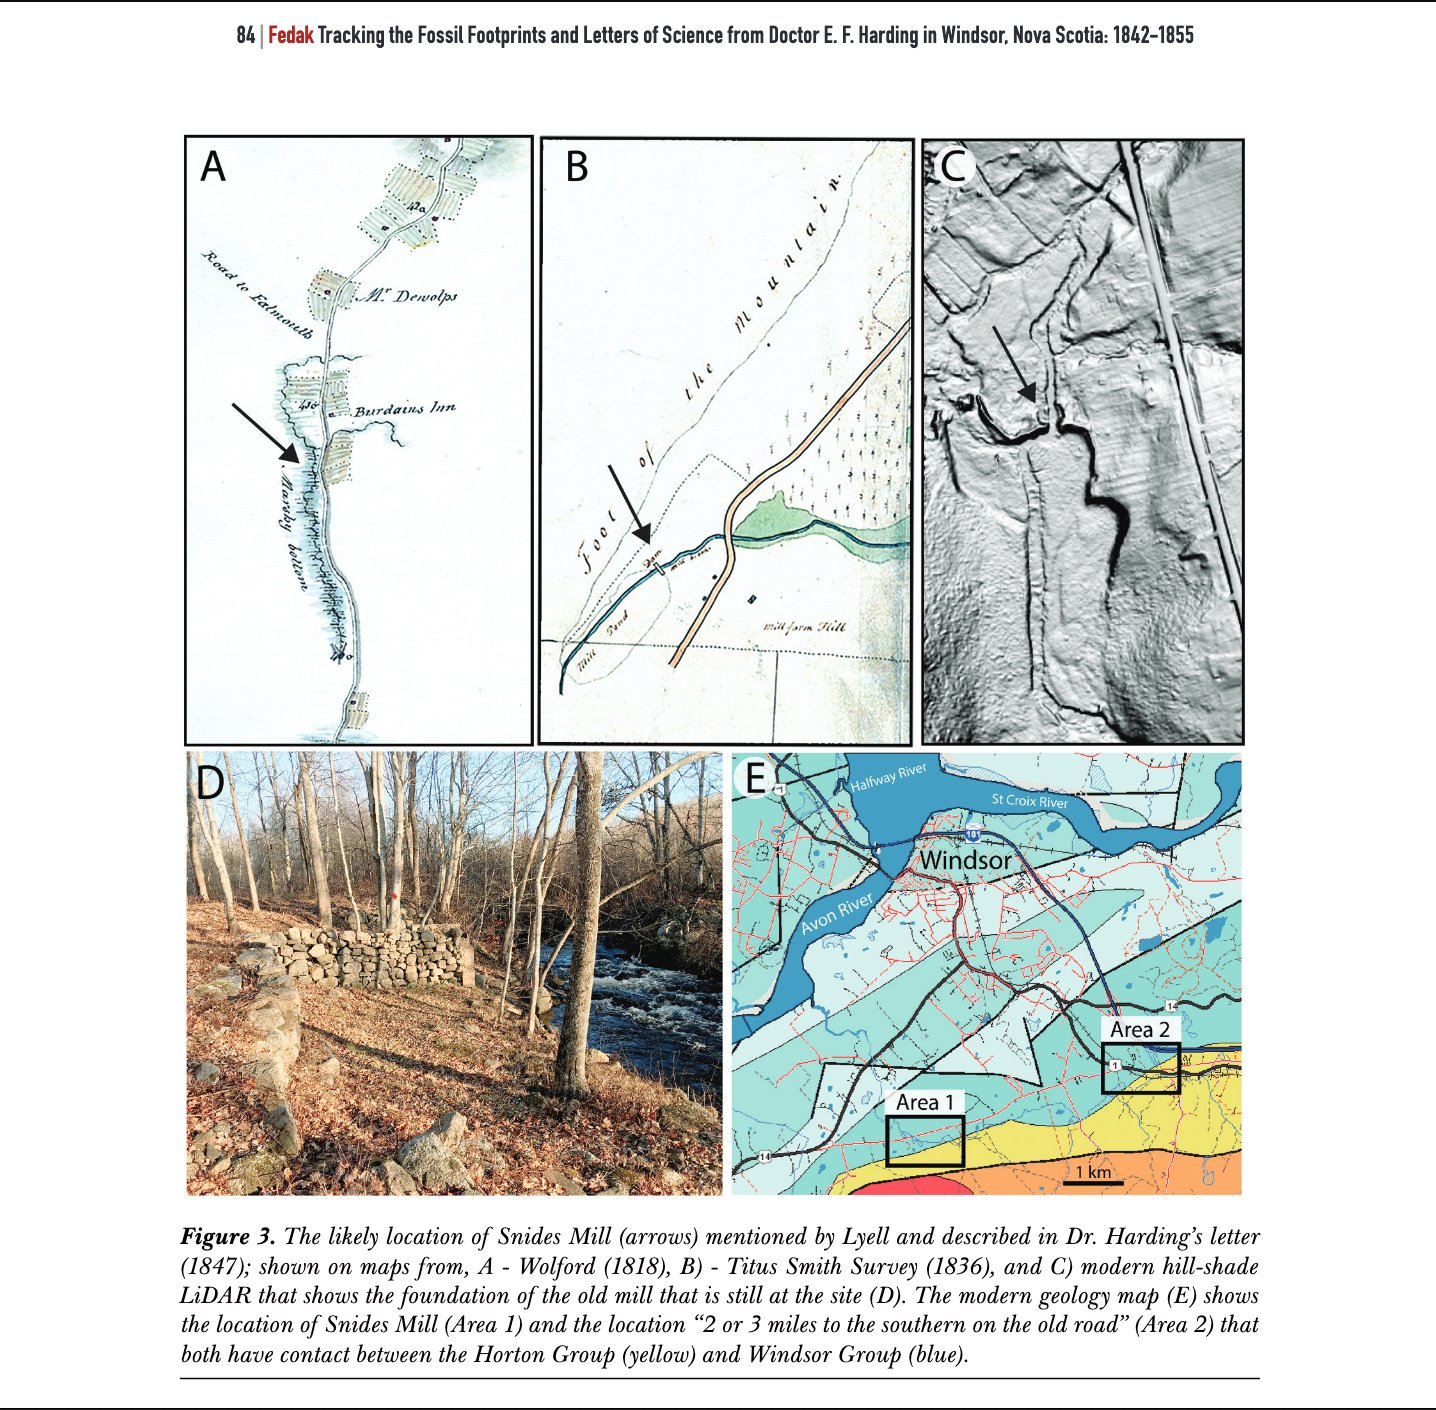 Maps showing the likely location of Snides Mill mentioned by Lyell and described in Dr. Harding’s letter (1847); shown on maps from Wolford (1818), Titus Smith Survey (1836), and modern hill-shade LiDAR that shows the foundation of the old mill that is still at the site. The modern geology map shows the location of Snides Mill and the location “2 or 3 miles to the southern on the old road” that both have contact between the Horton Group and Windsor Group.